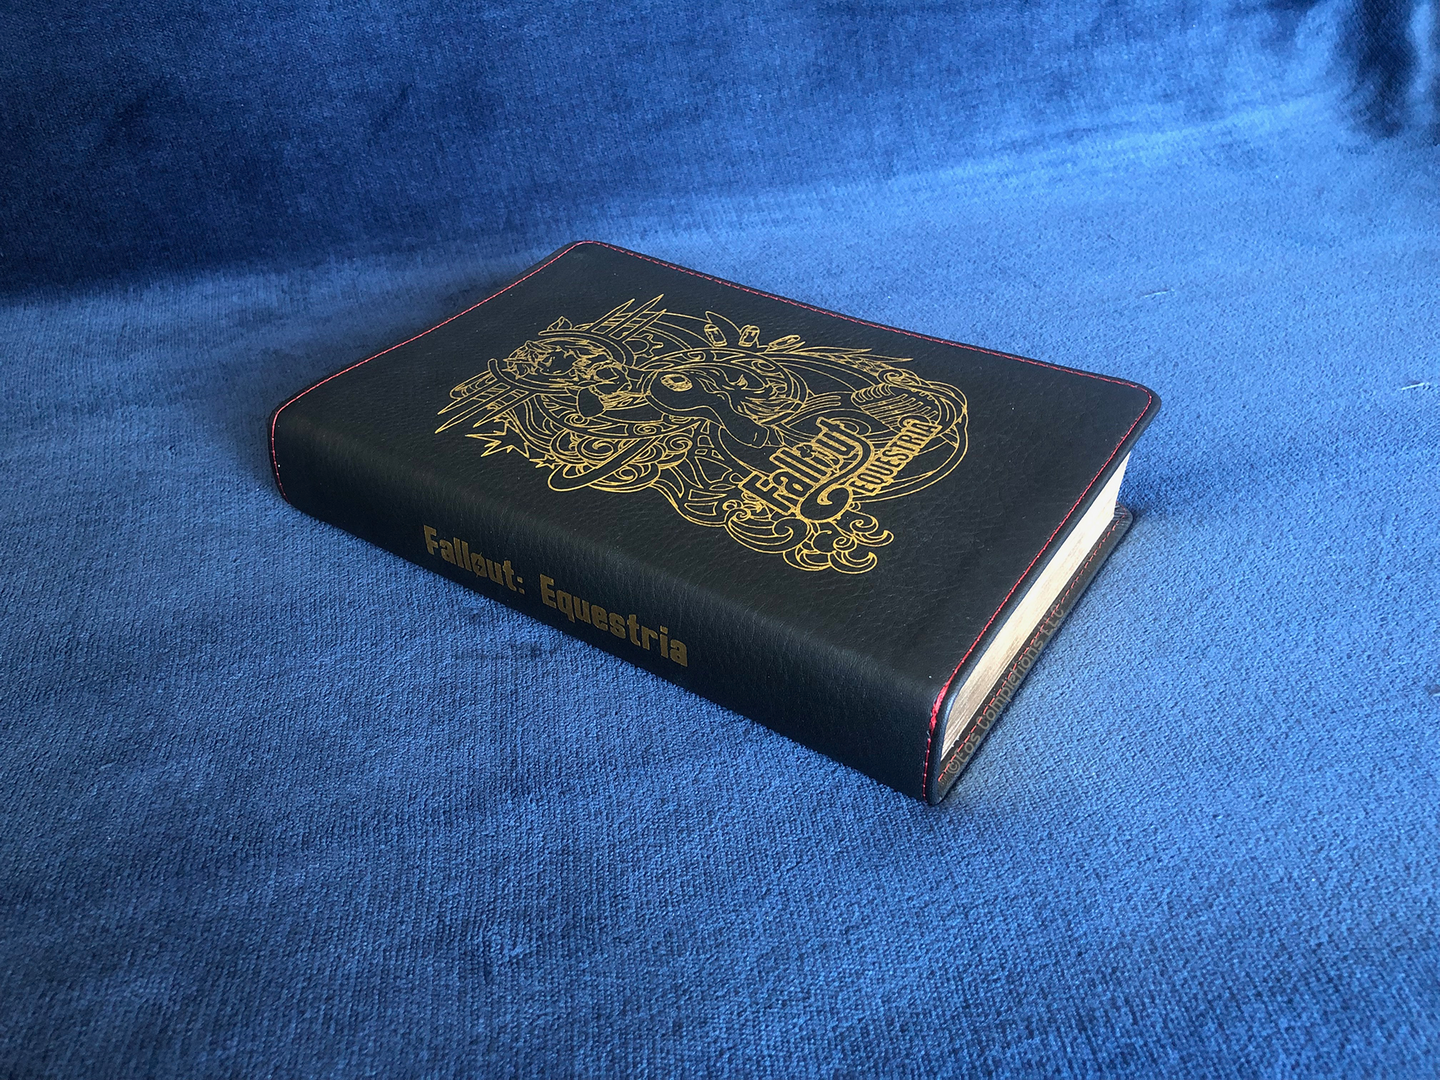 Fallout Equestria - The Black Book Edition - Absolutely ...